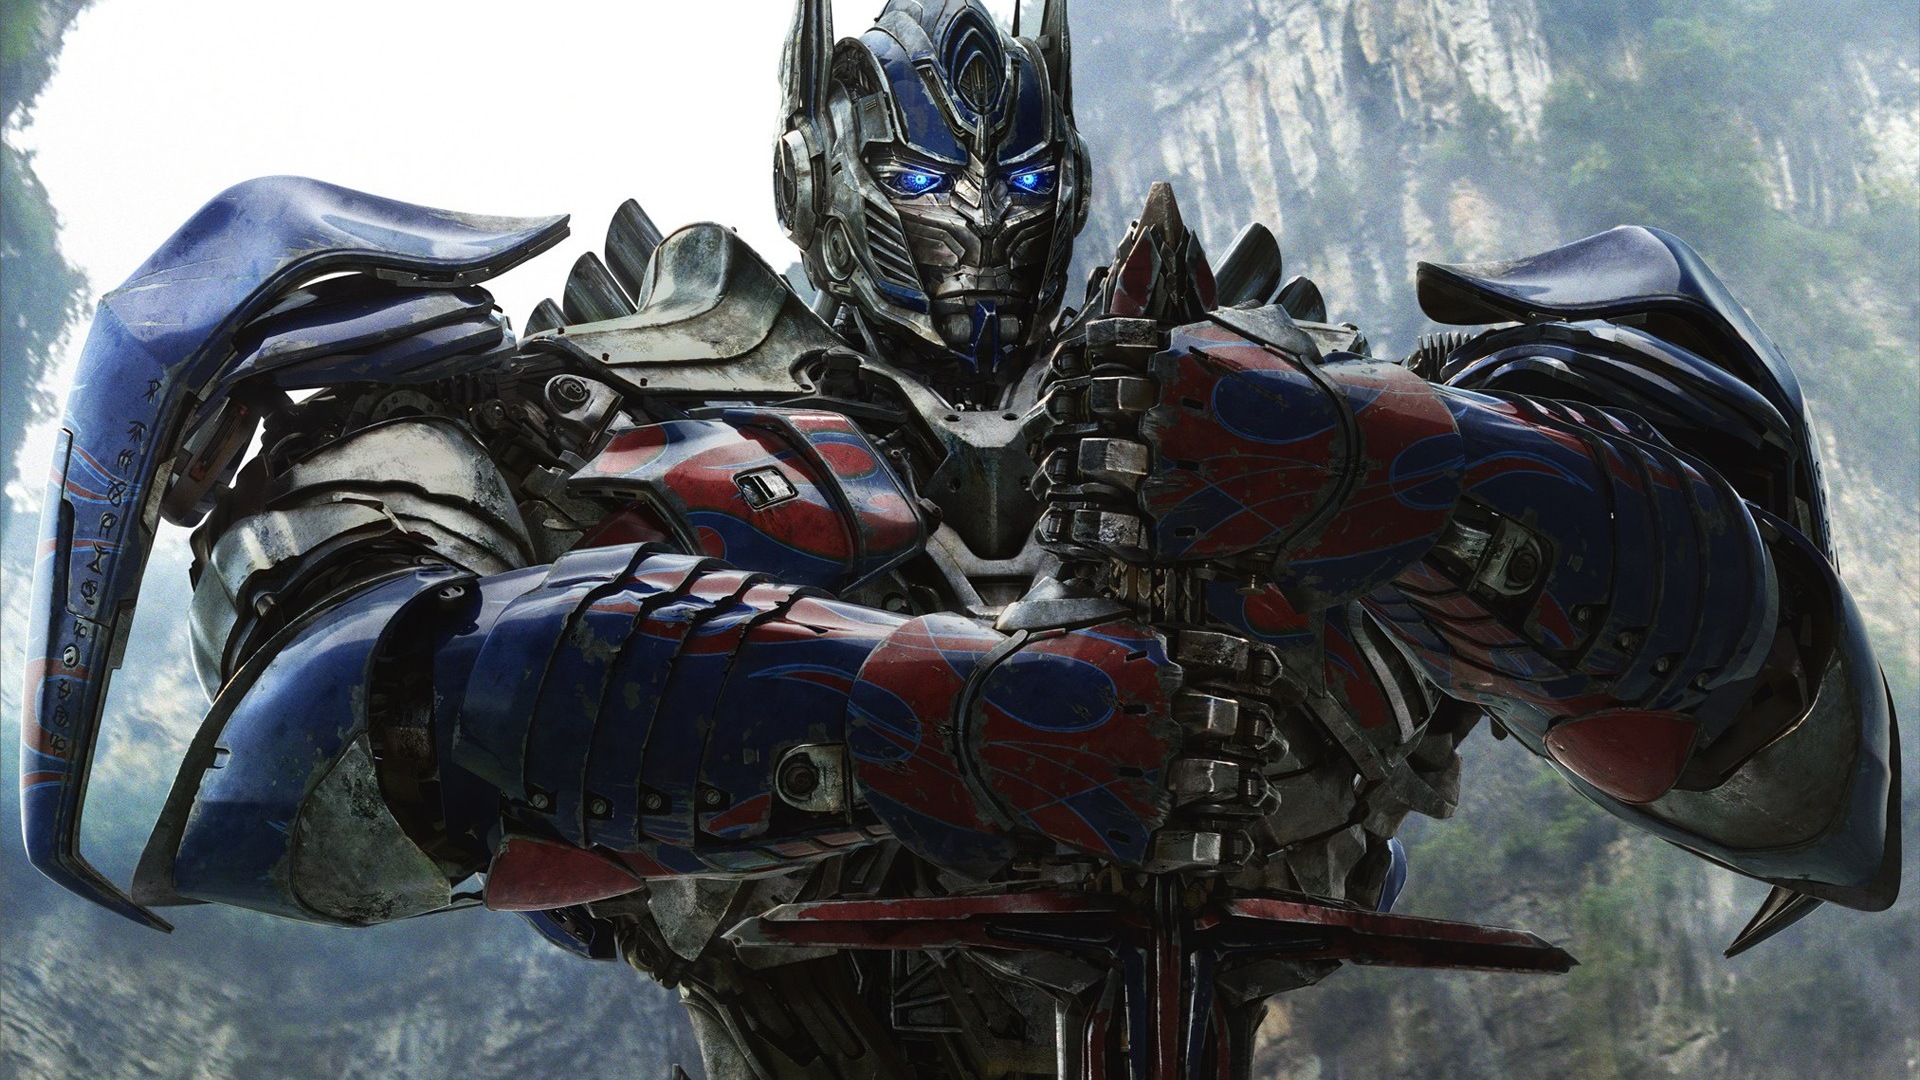 2014 Transformers: Age of Extinction HD tapety #10 - 1920x1080